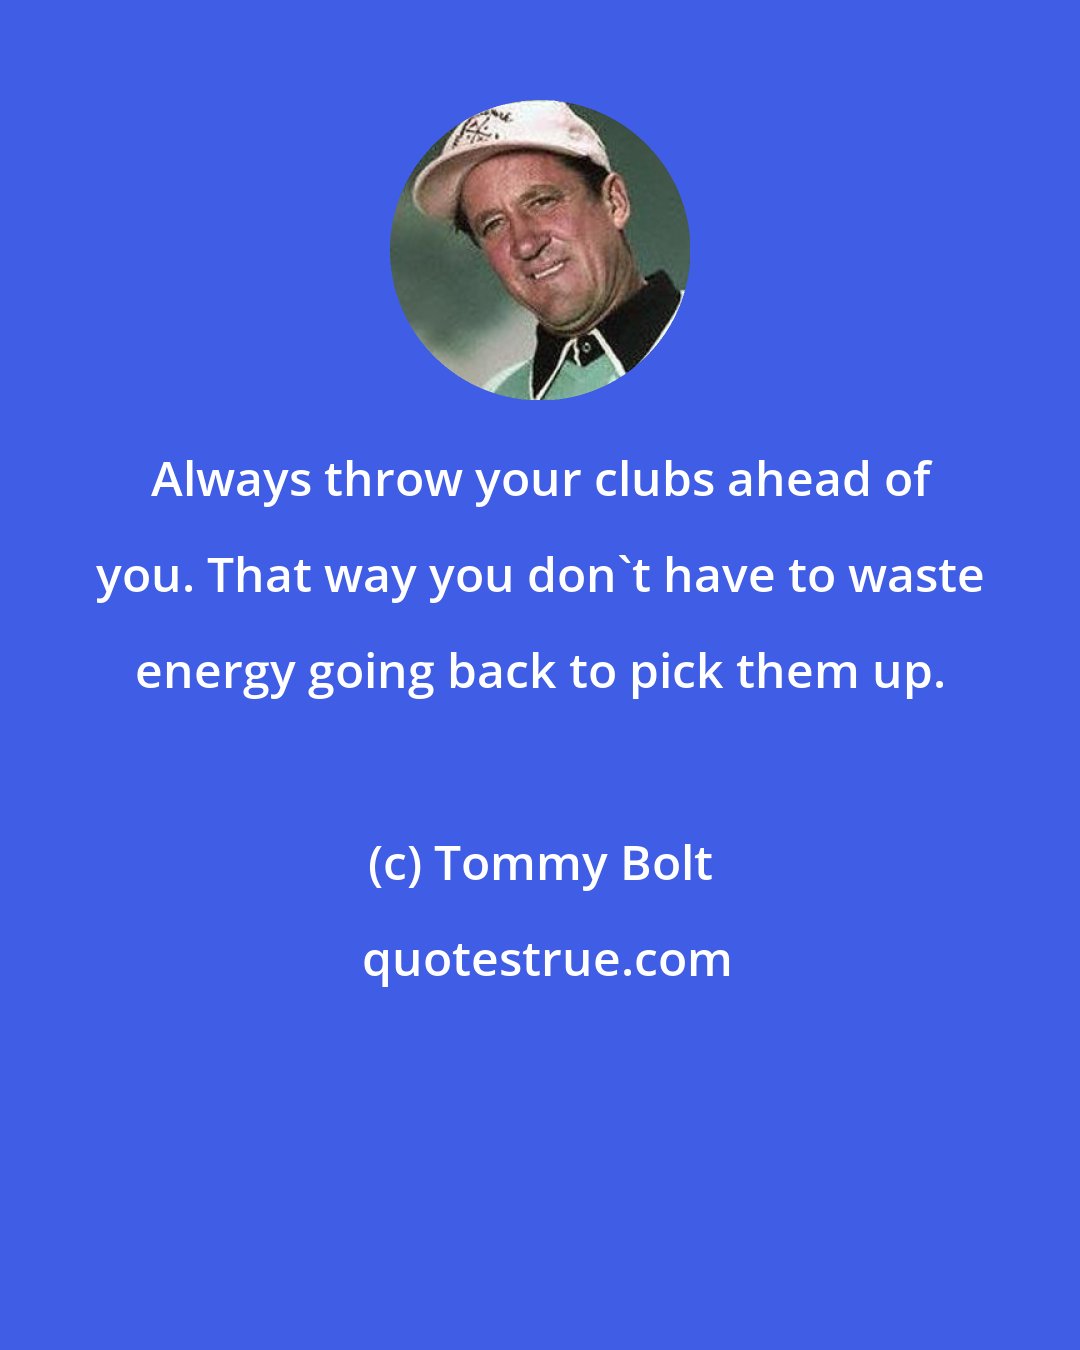 Tommy Bolt: Always throw your clubs ahead of you. That way you don't have to waste energy going back to pick them up.